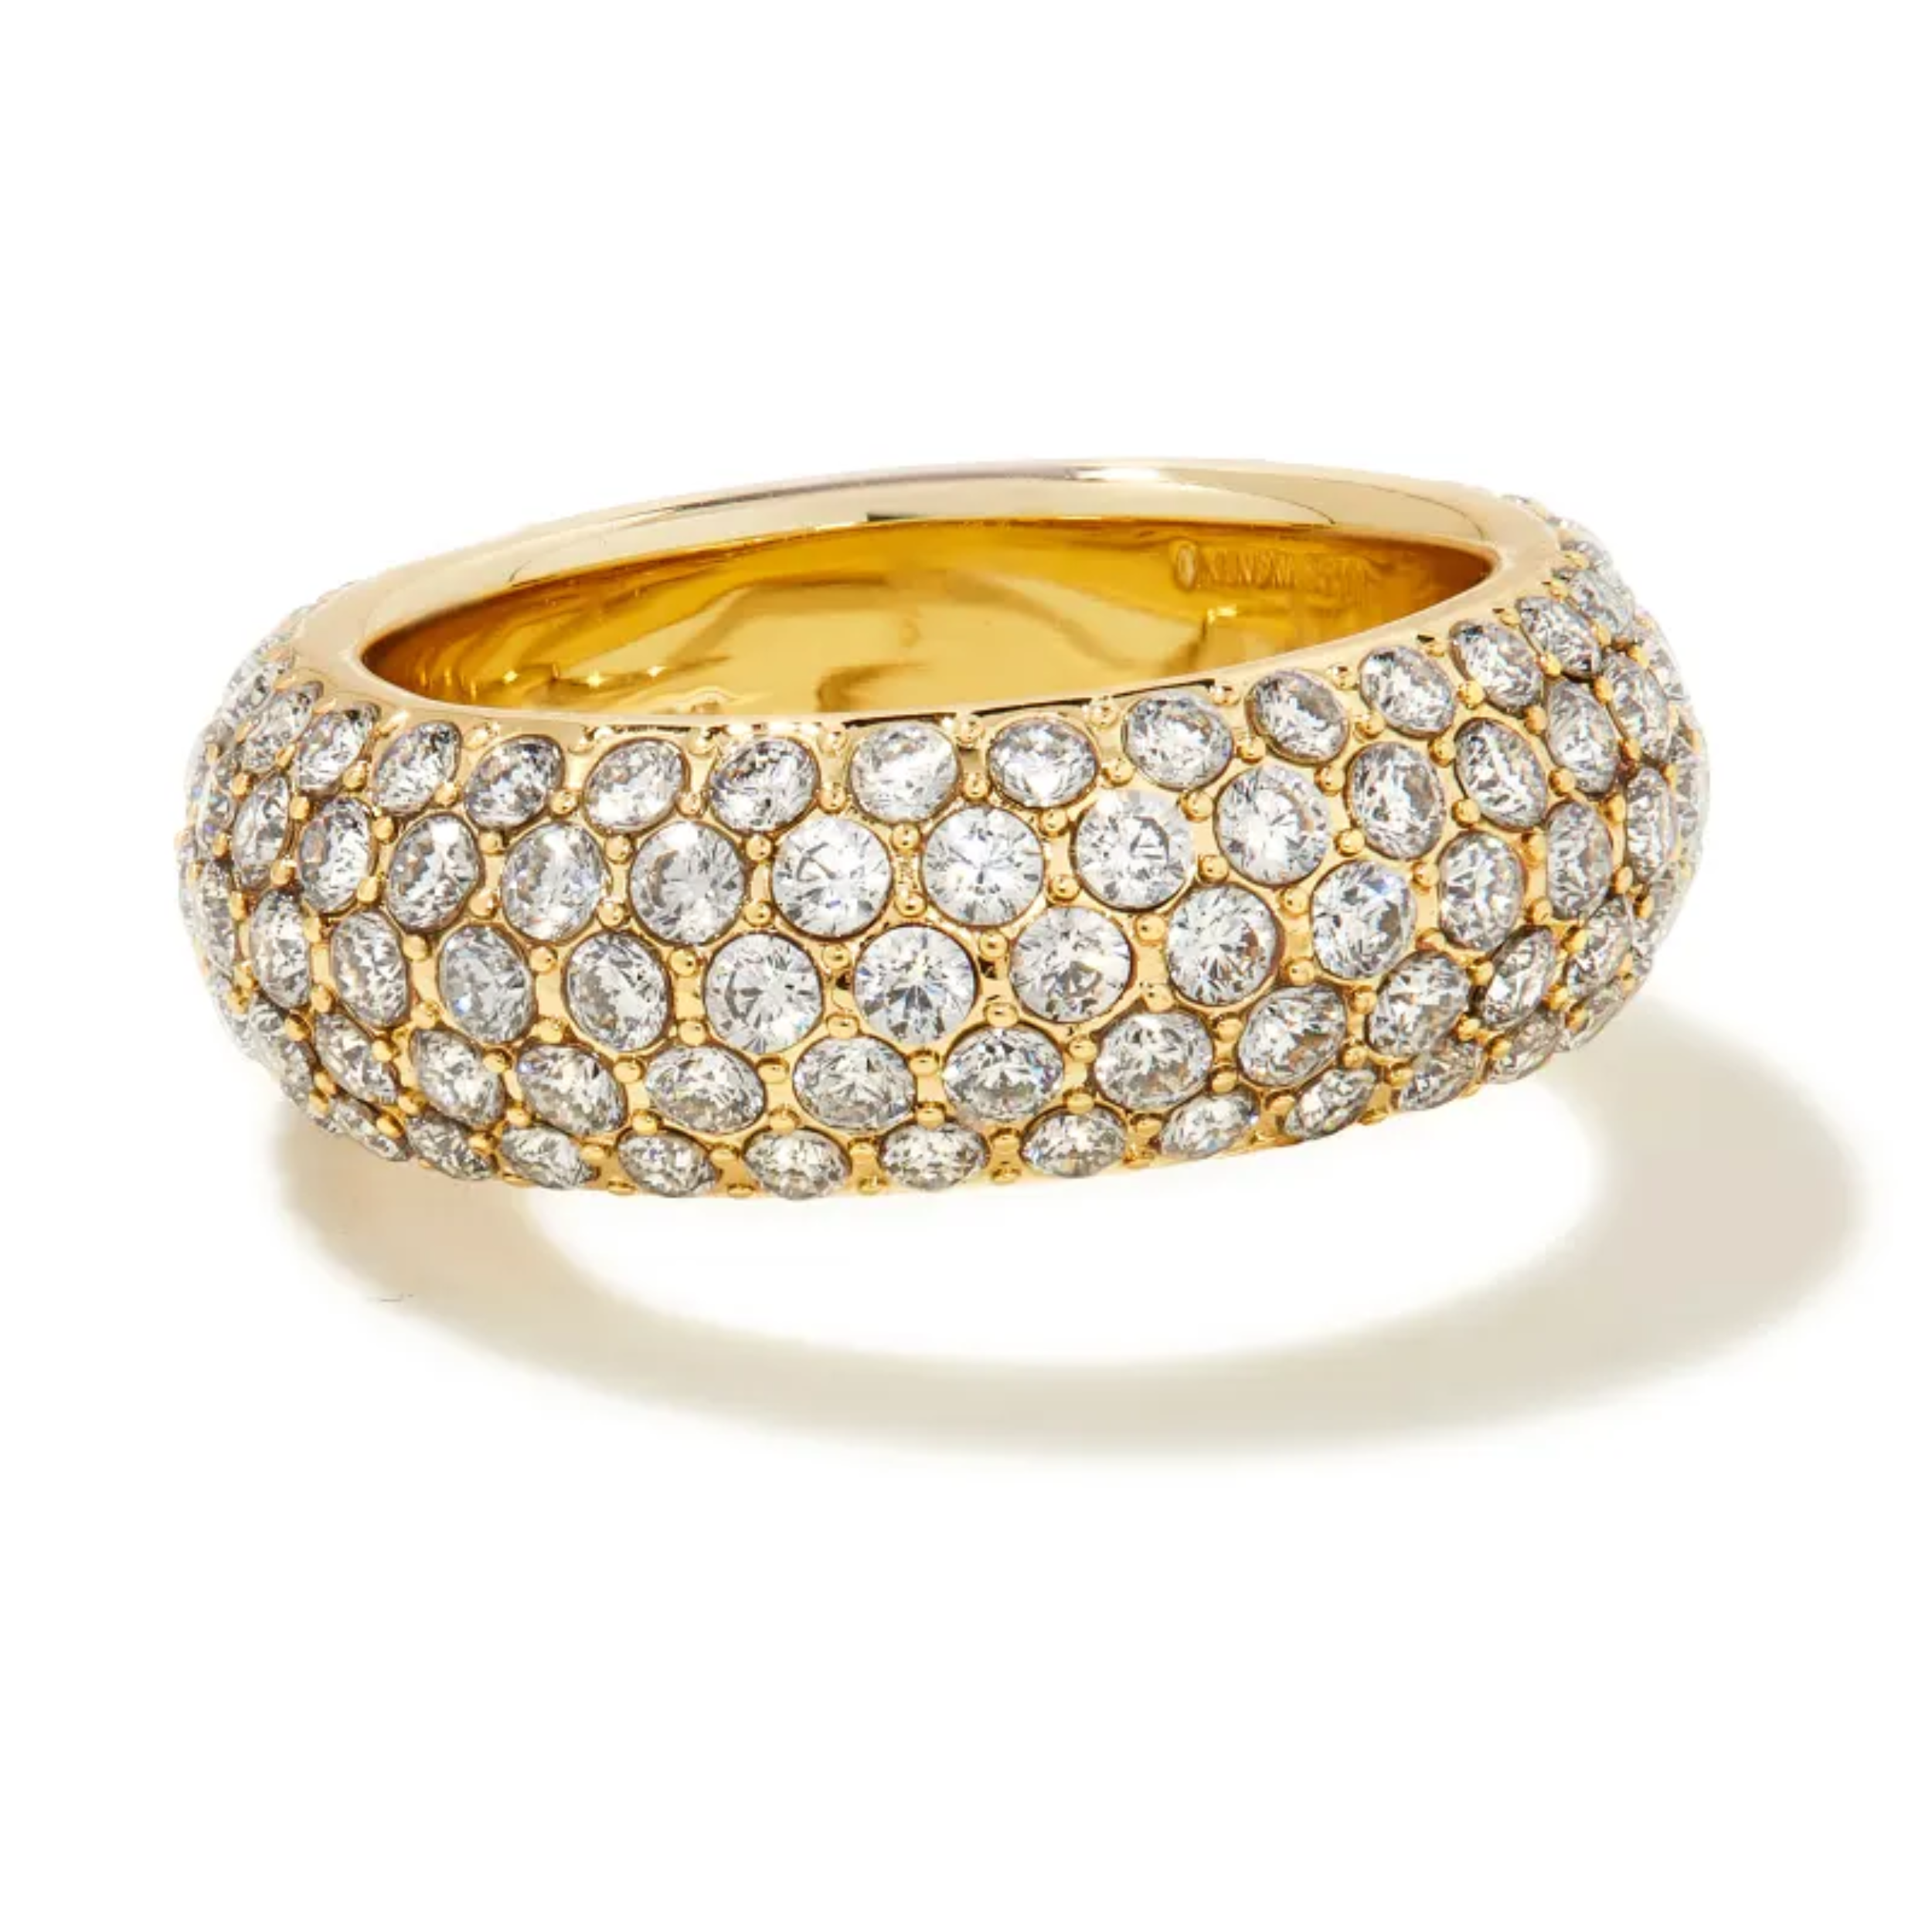 This Mikki pave Gold Band Ring in Size 7 is pictured on a white background.